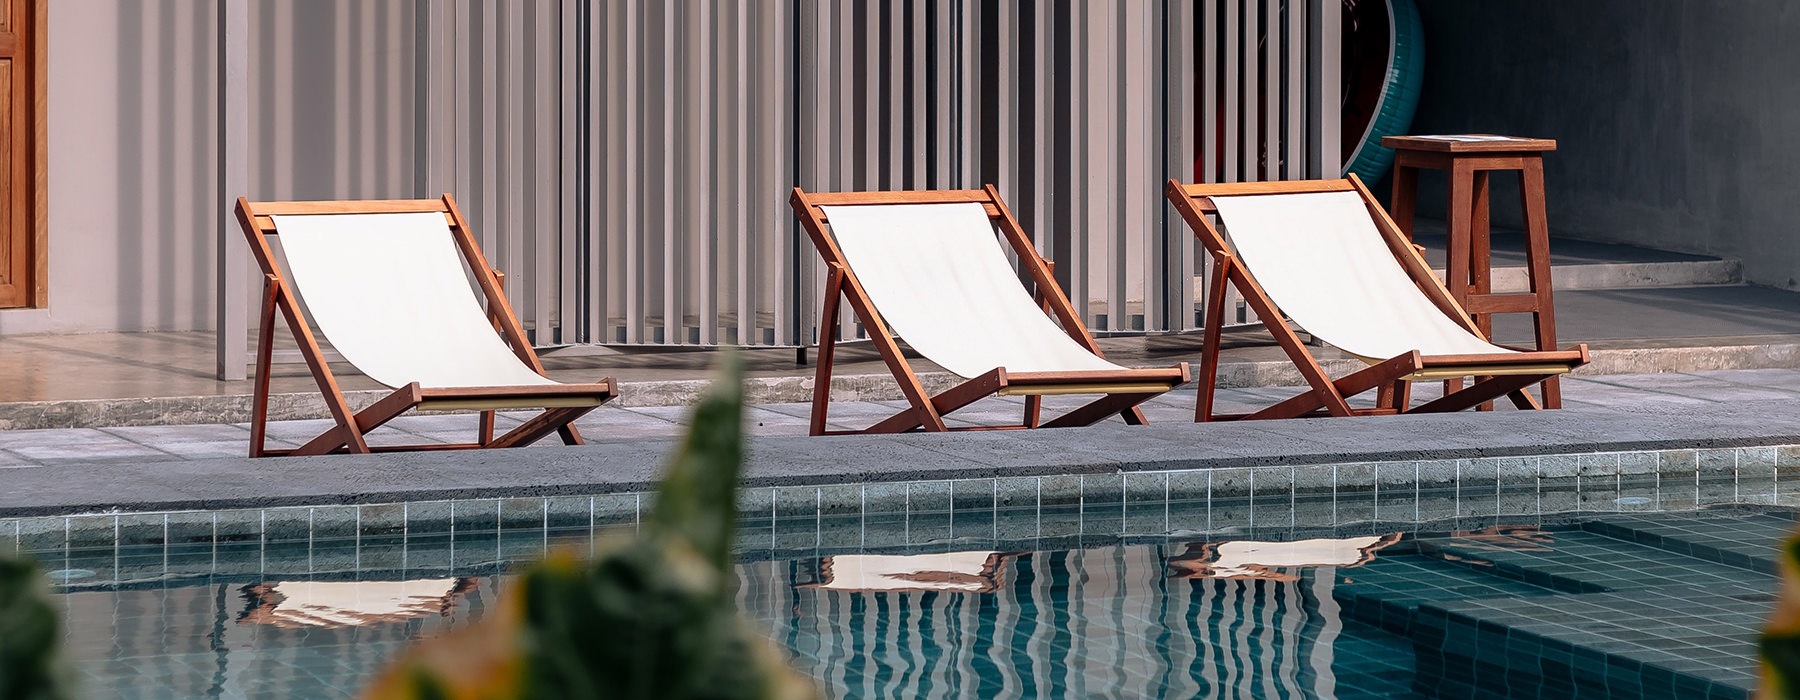 pool with lounge chairs